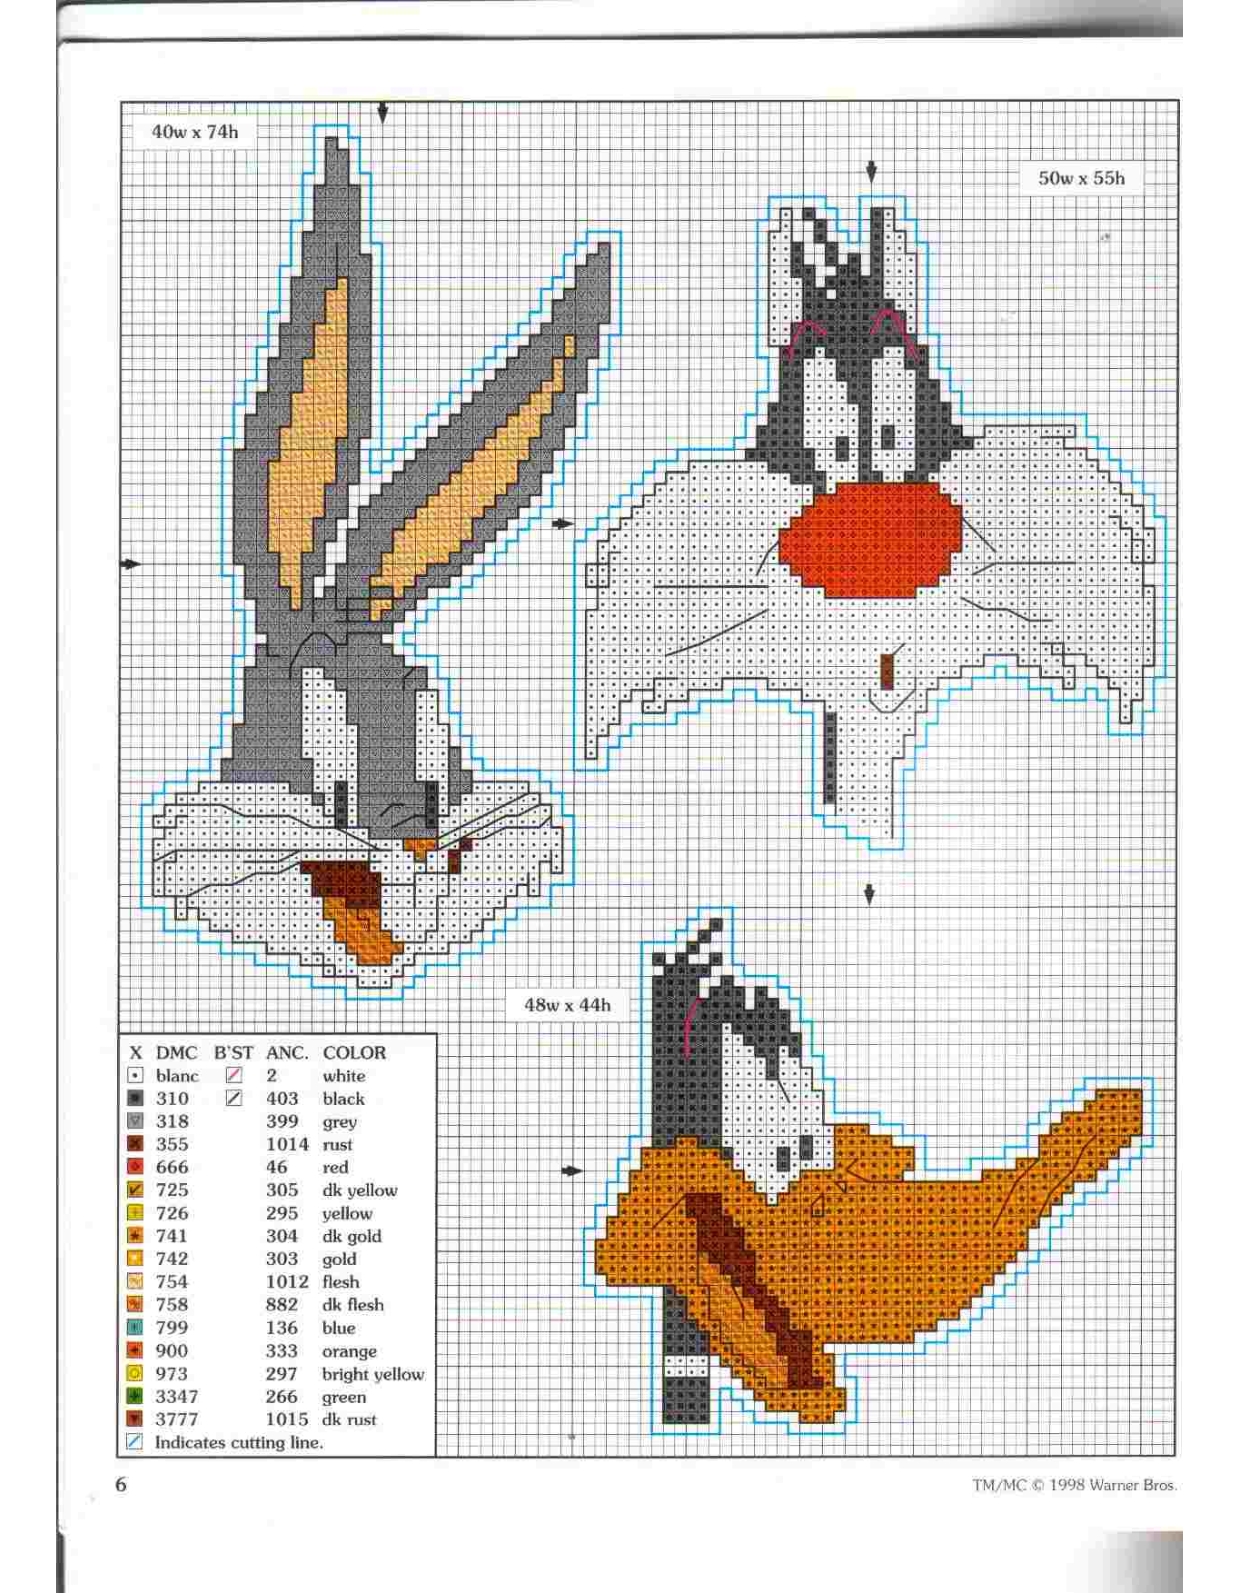 Cross stitch patterns of Bugn Bunny Sylvester the cat and Daffy Duck